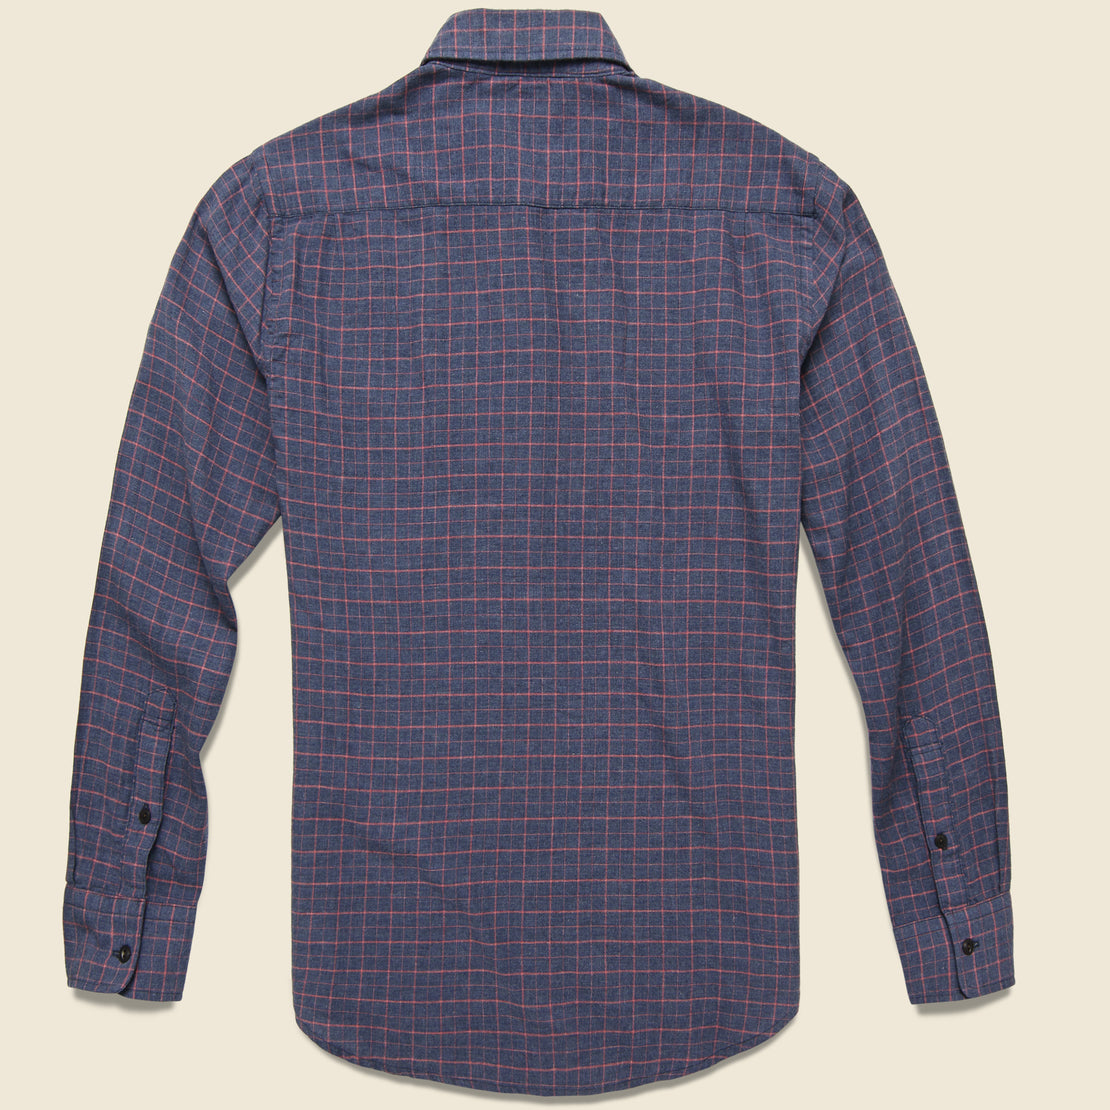 Windowpane Pacific Shirt - Charcoal/Coral - Faherty - STAG Provisions - Tops - L/S Woven - Plaid